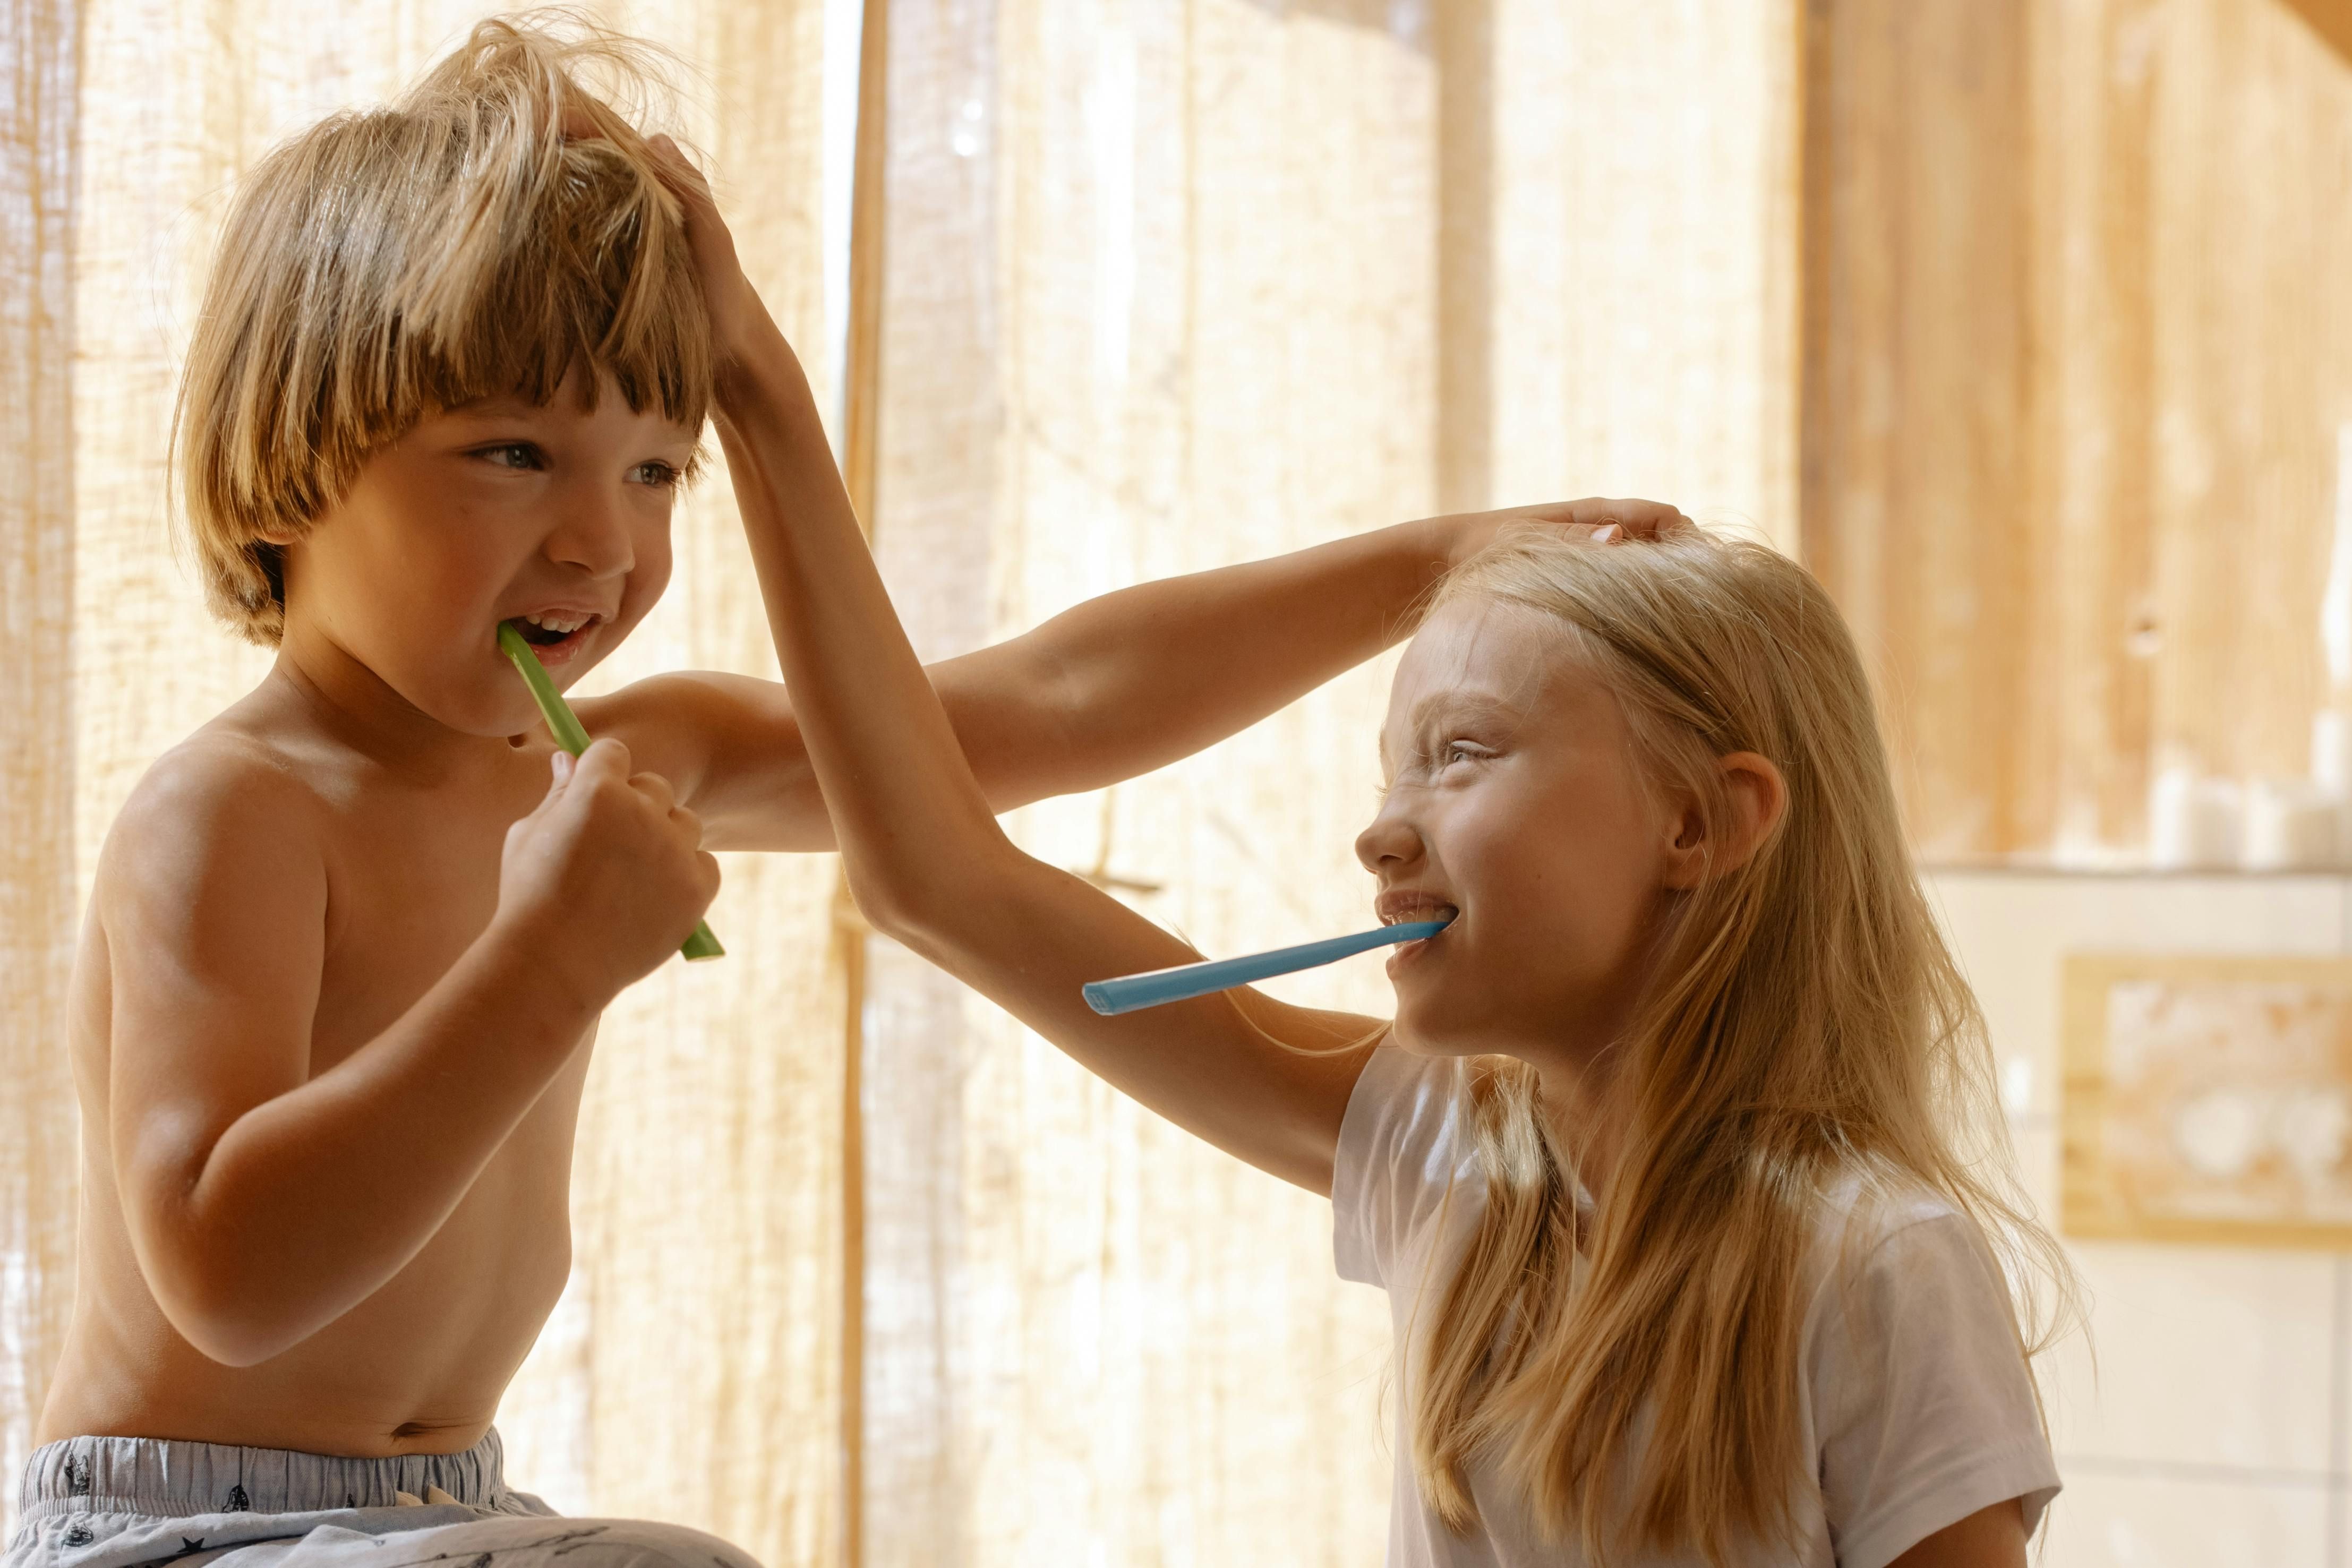 Young children brushing teeth, demonstrating proper oral hygiene technique